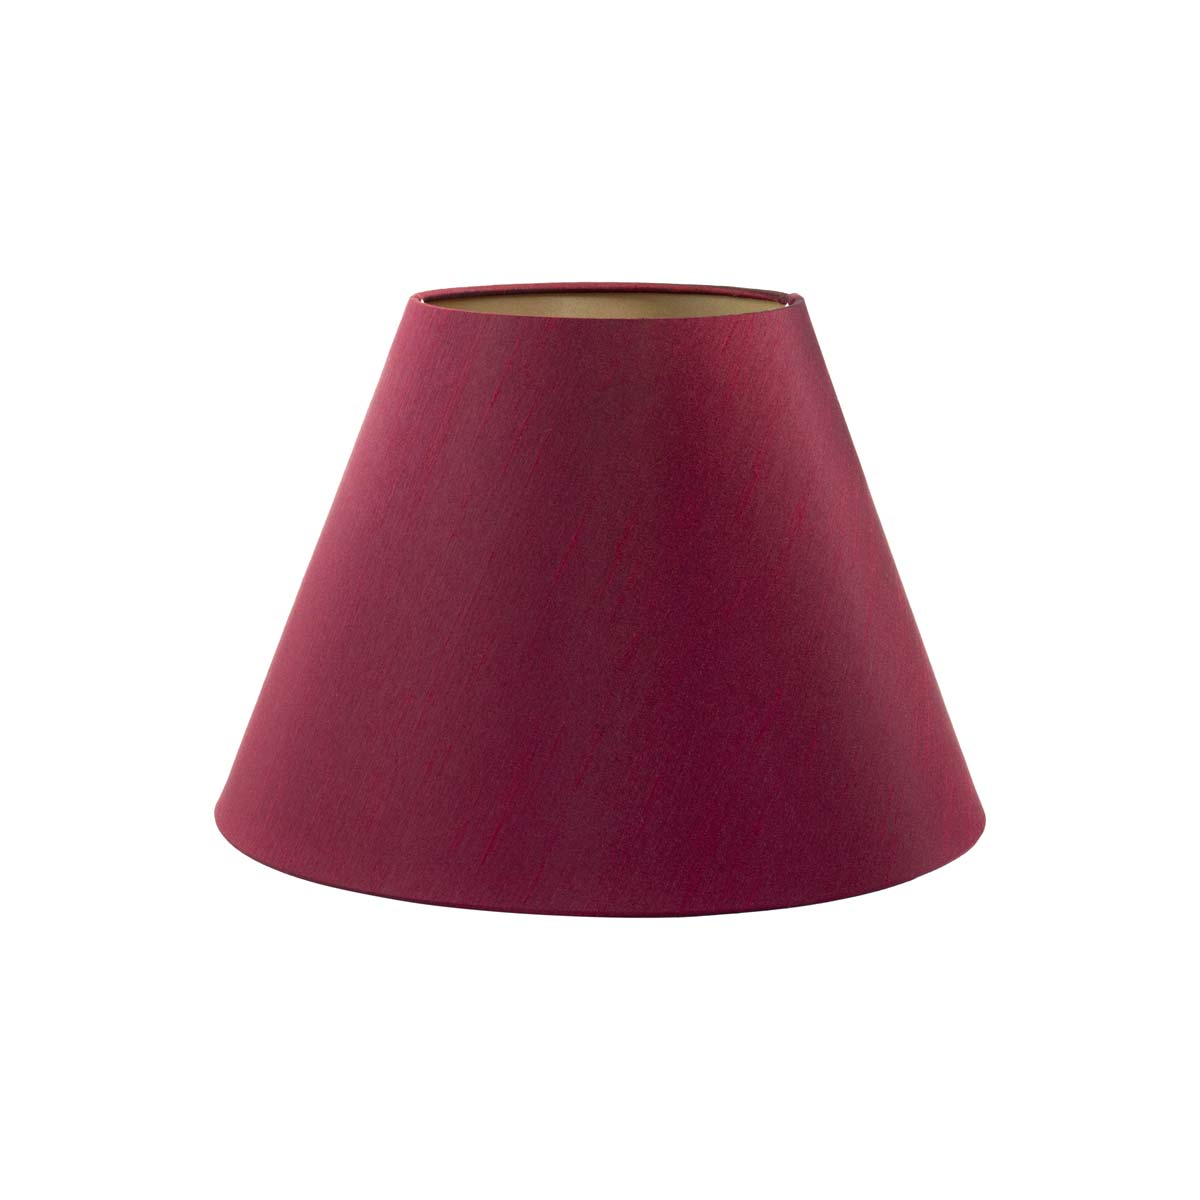 Burgundy French empire lampshade with a gold lining.